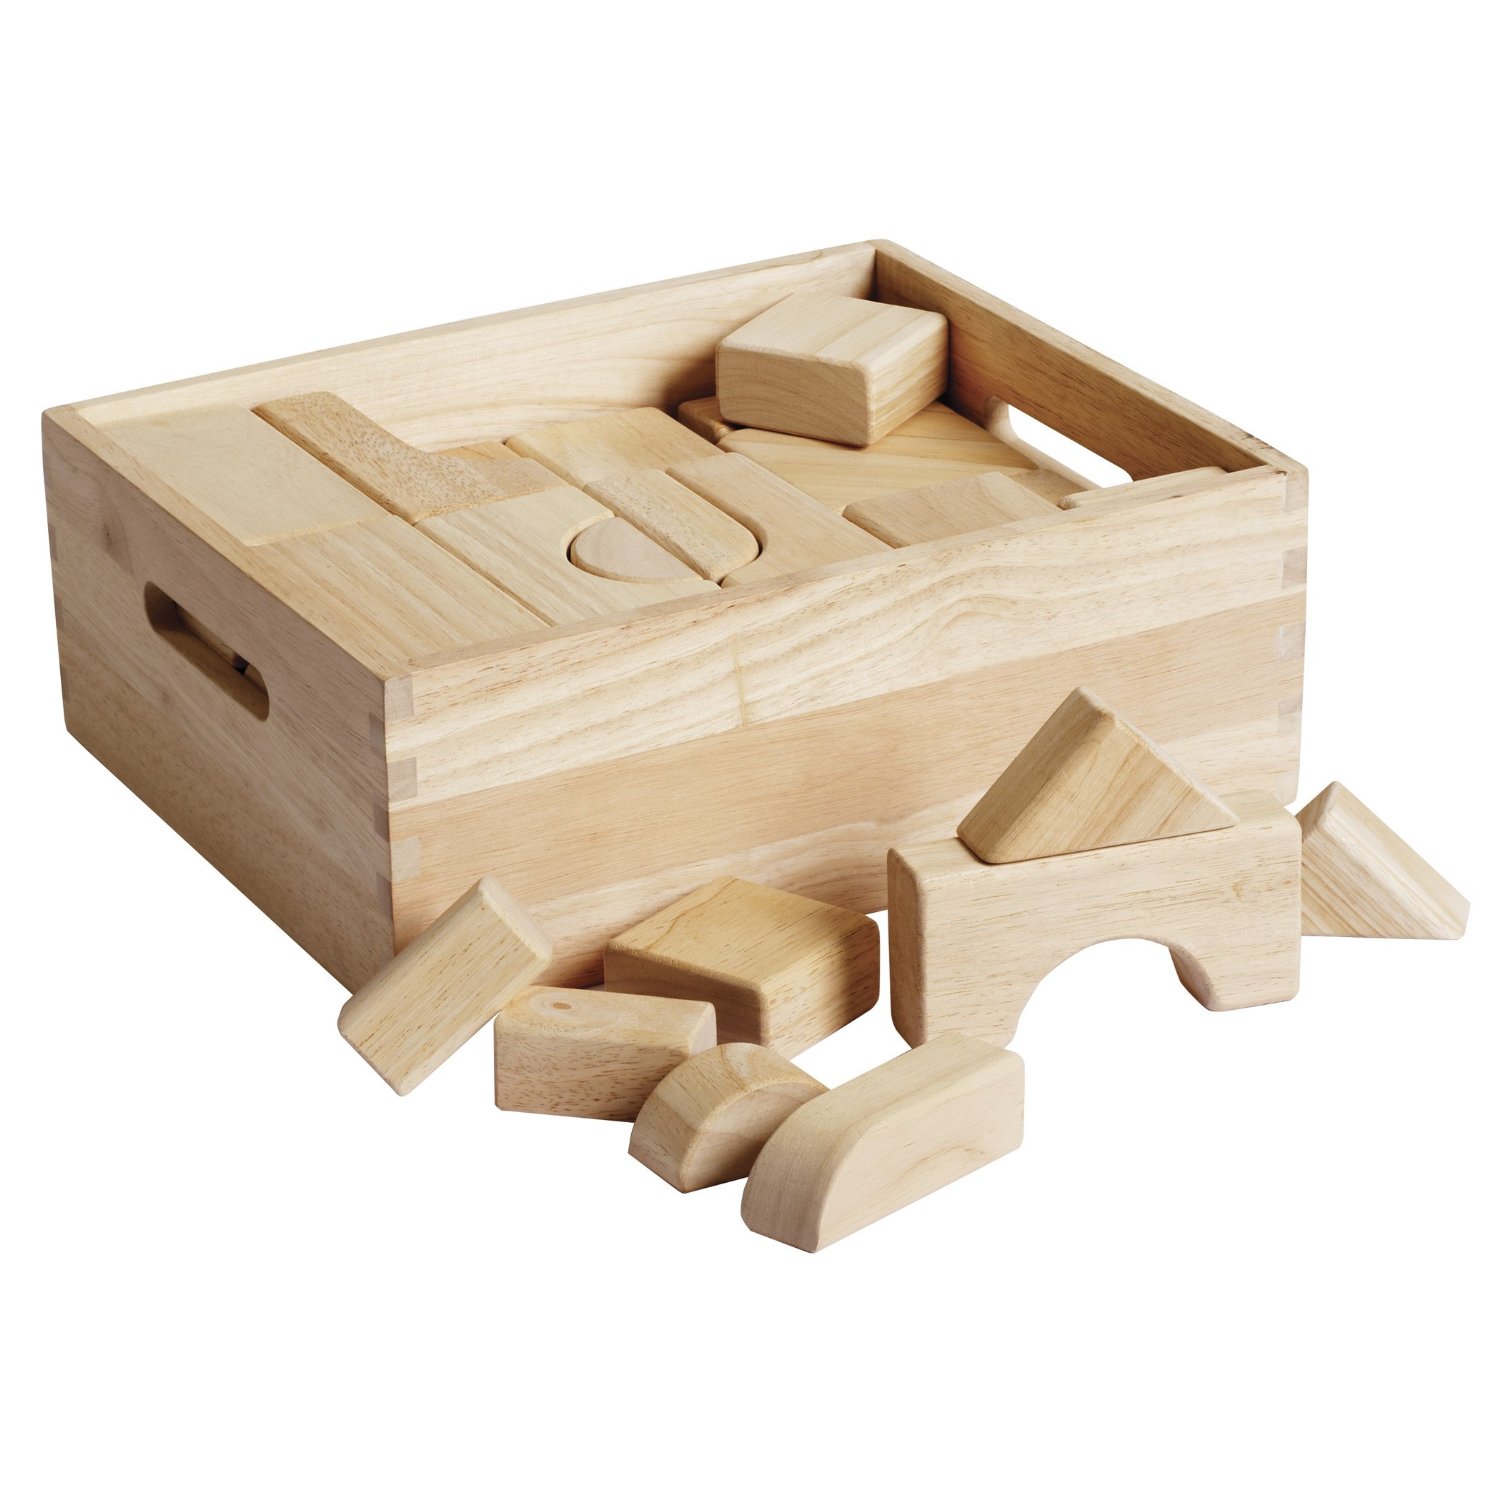 toy wooden buildings